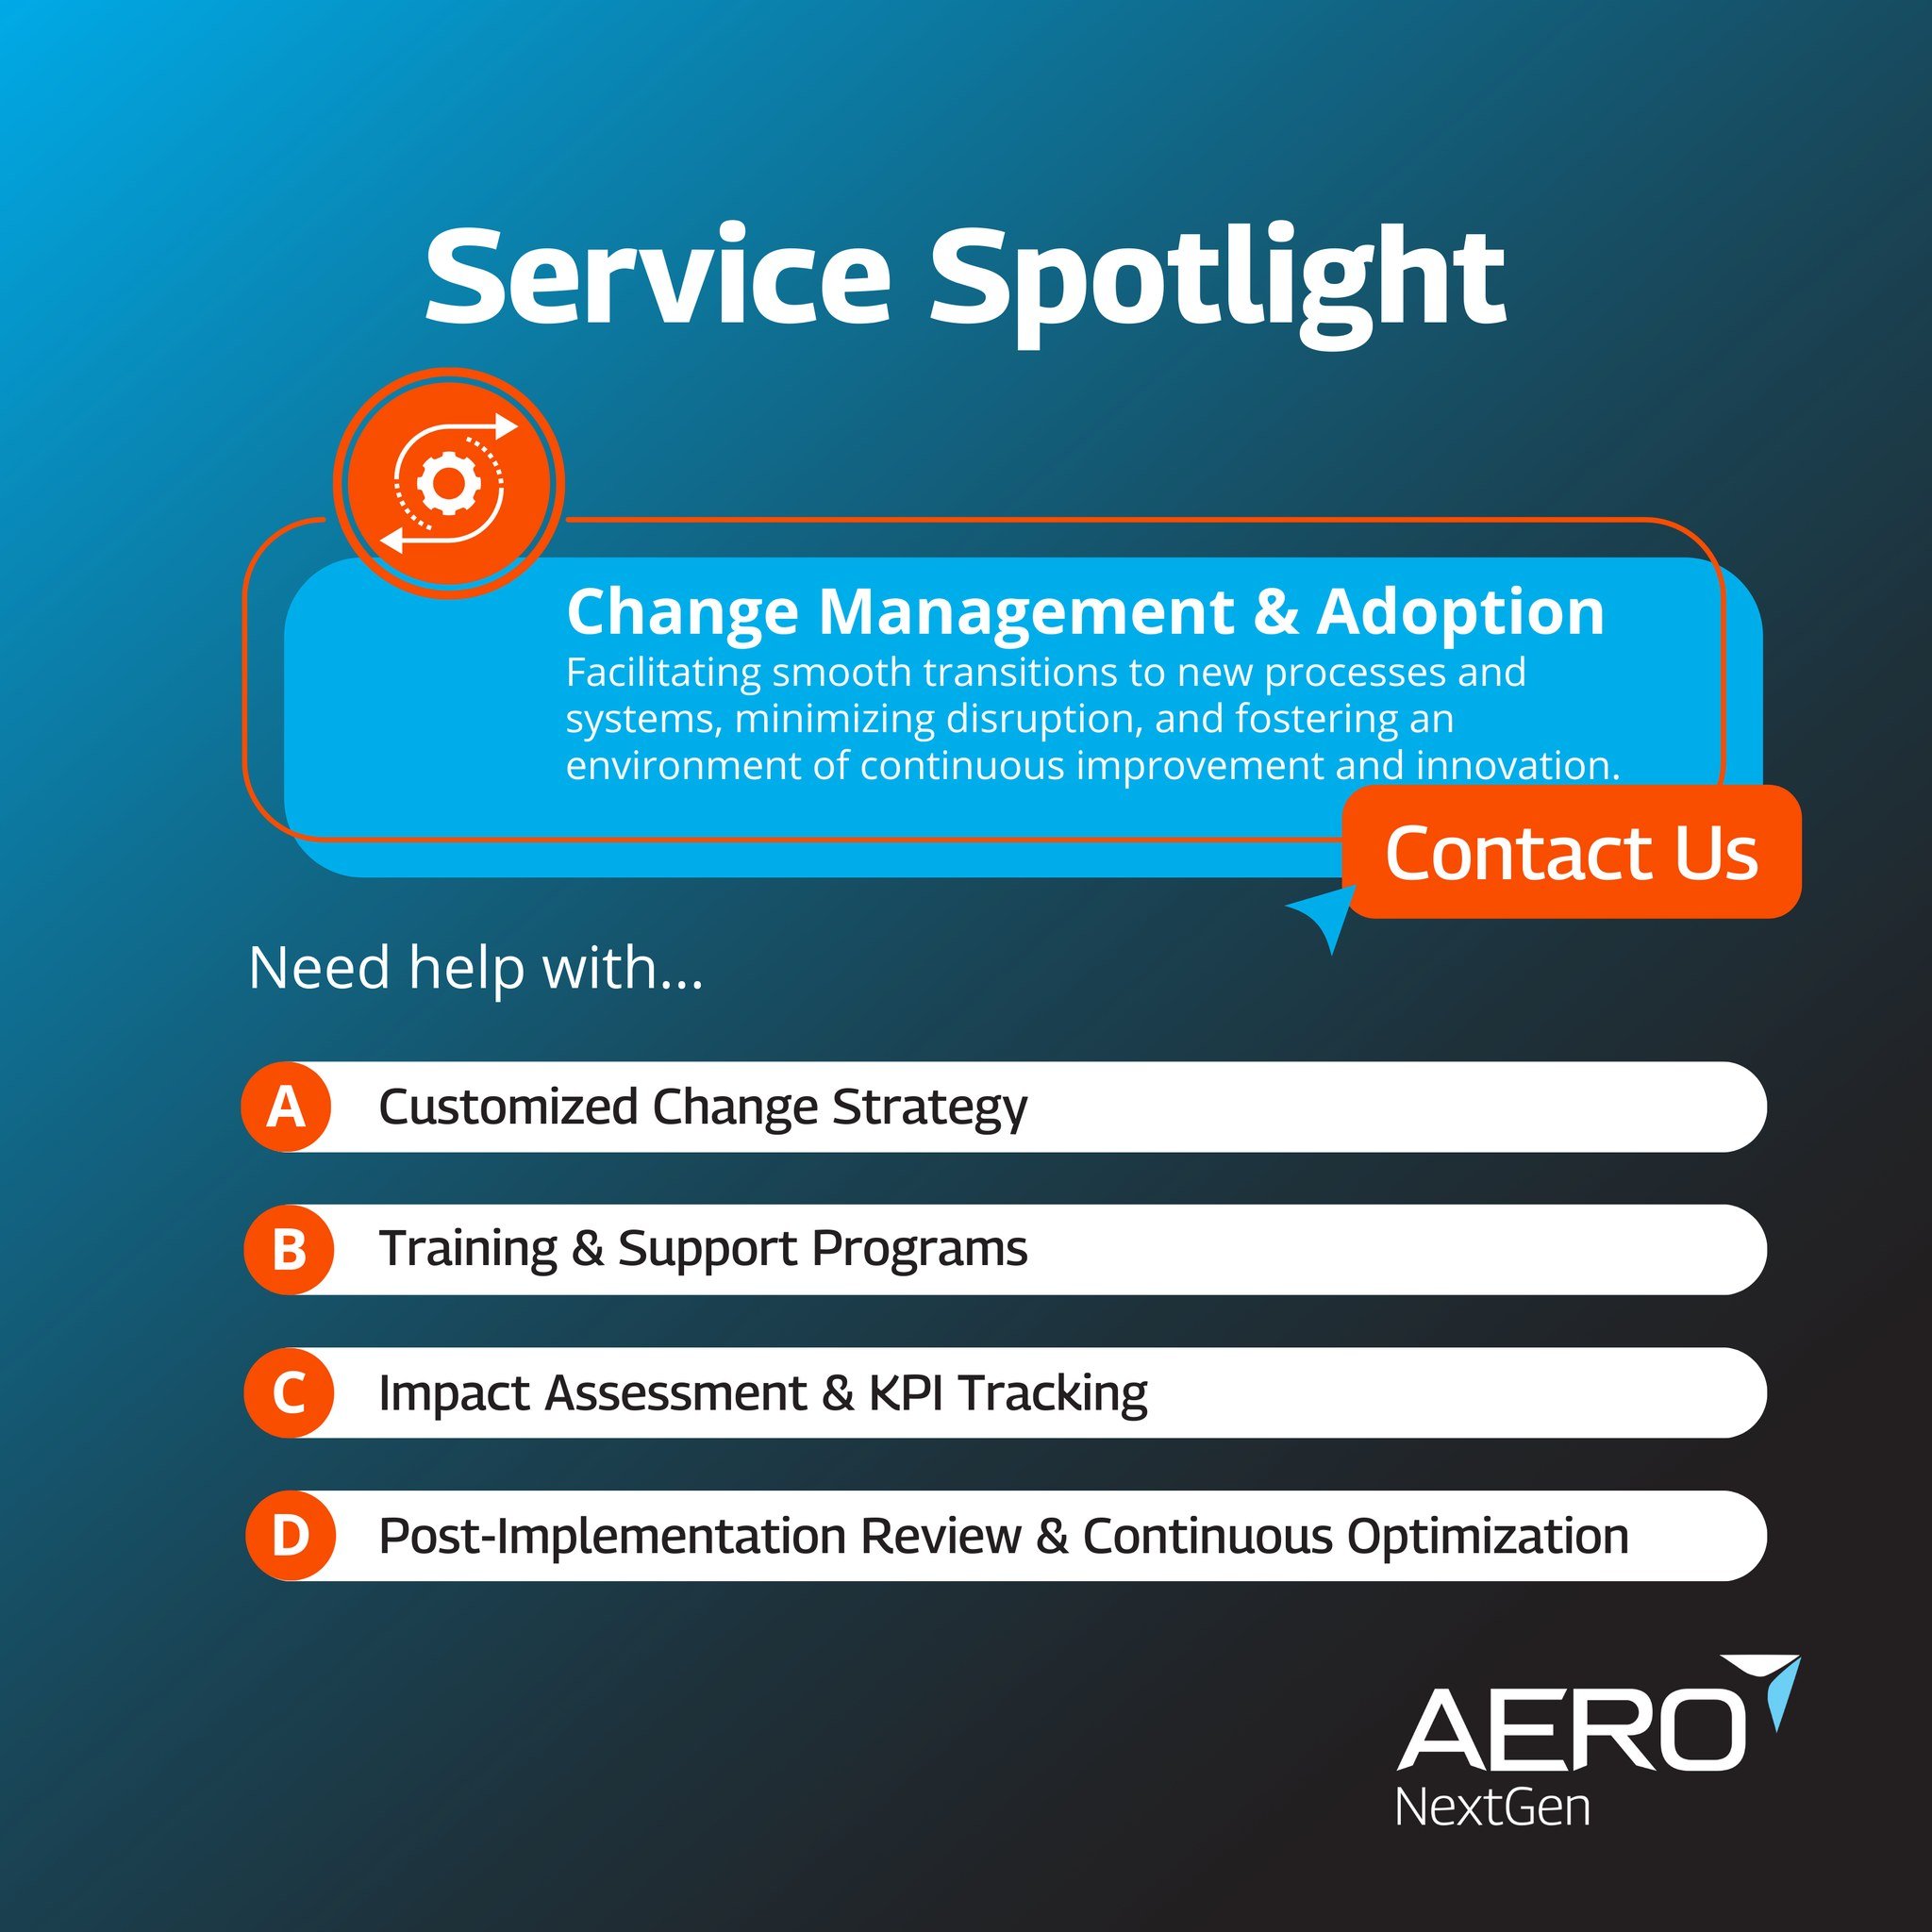 ERVICE SPOTLIGHT | Mastering Seamless Change Management &amp; Adoption with Aero NextGen 🌟

At Aero NextGen, we specialize in navigating the complexities of adopting new processes and systems within the aviation MRO sector. 

Our commitment? To ensu